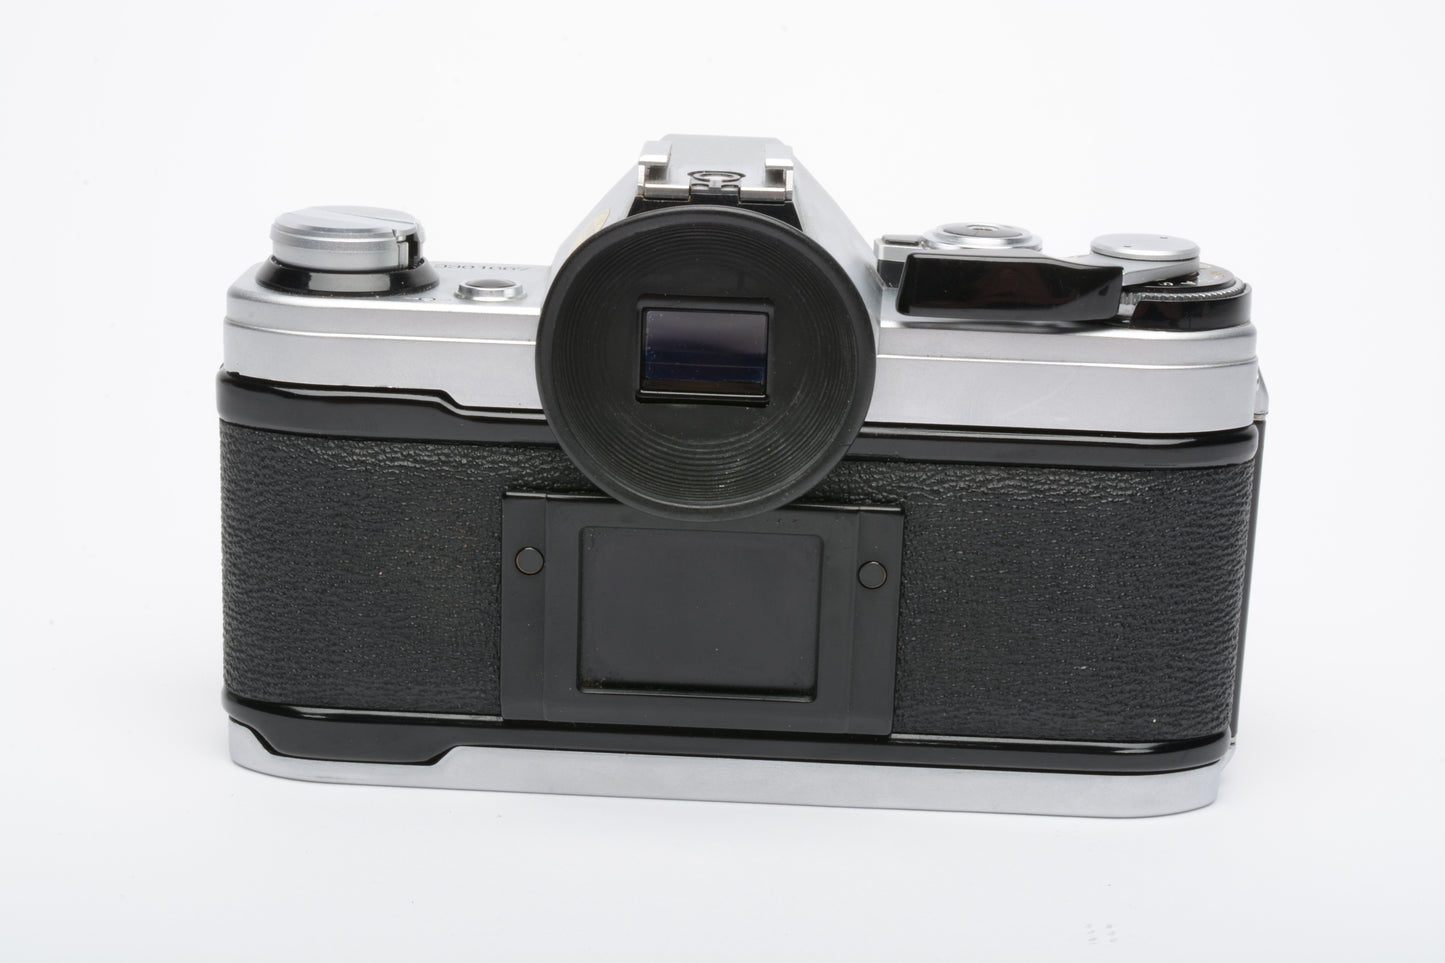 Canon AE-1 35mm SLR Body Only, new seals, eyecup, strap, tested, accurate